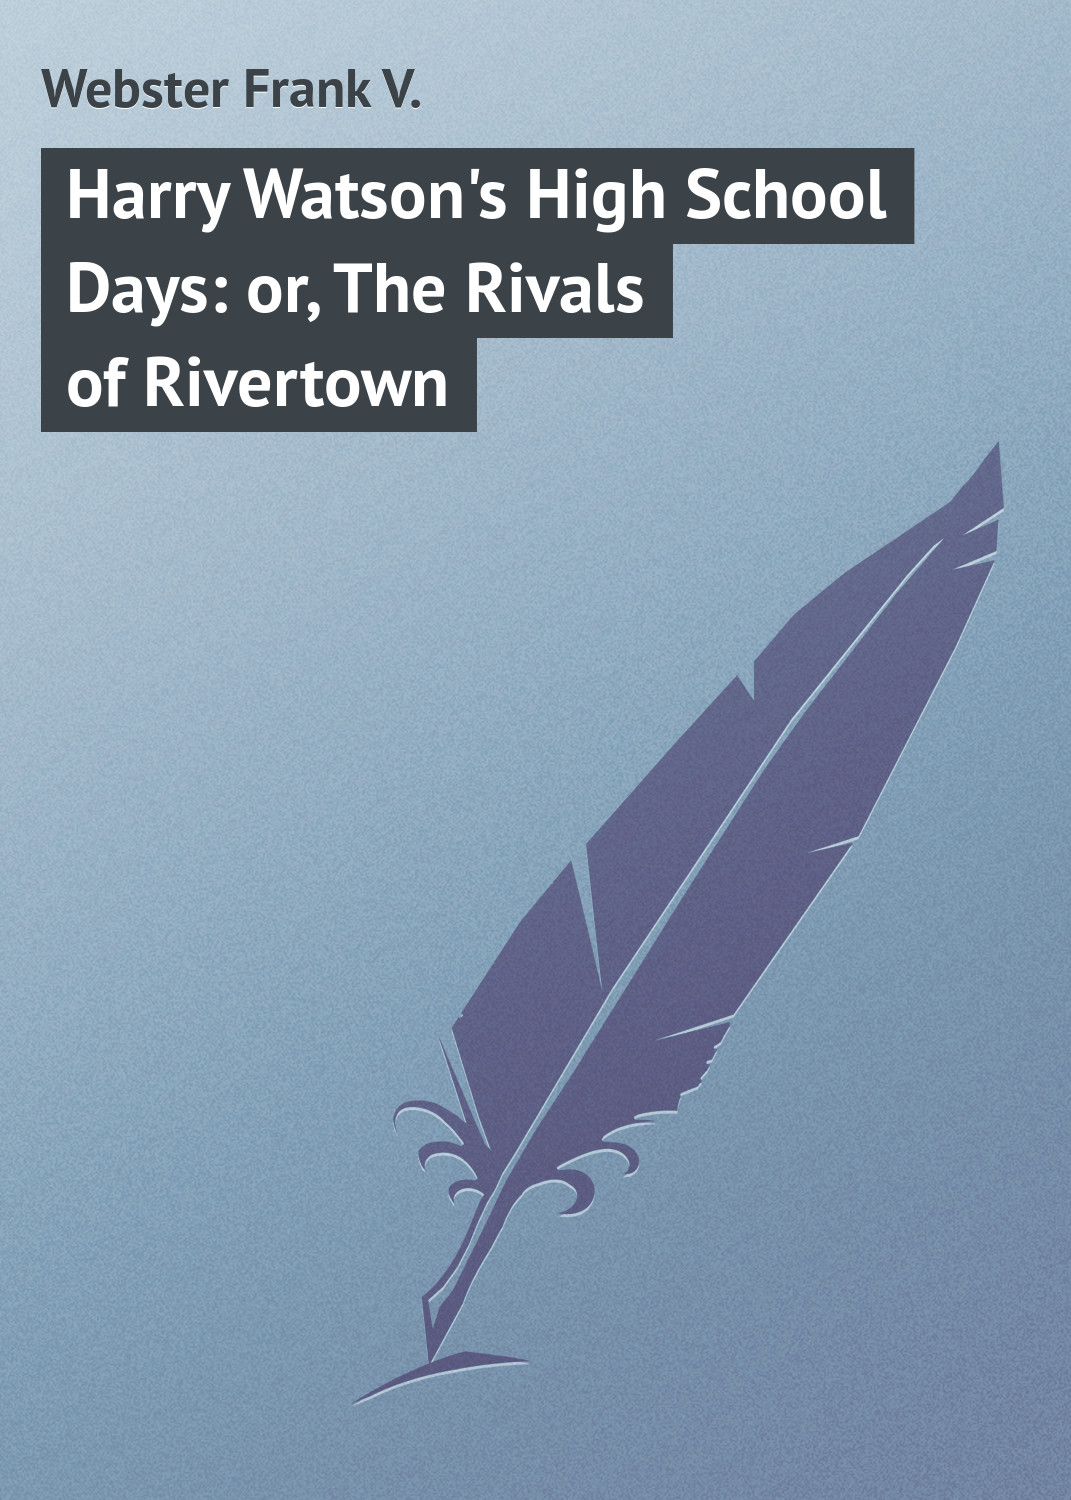 Harry Watson's High School Days: or, The Rivals of Rivertown